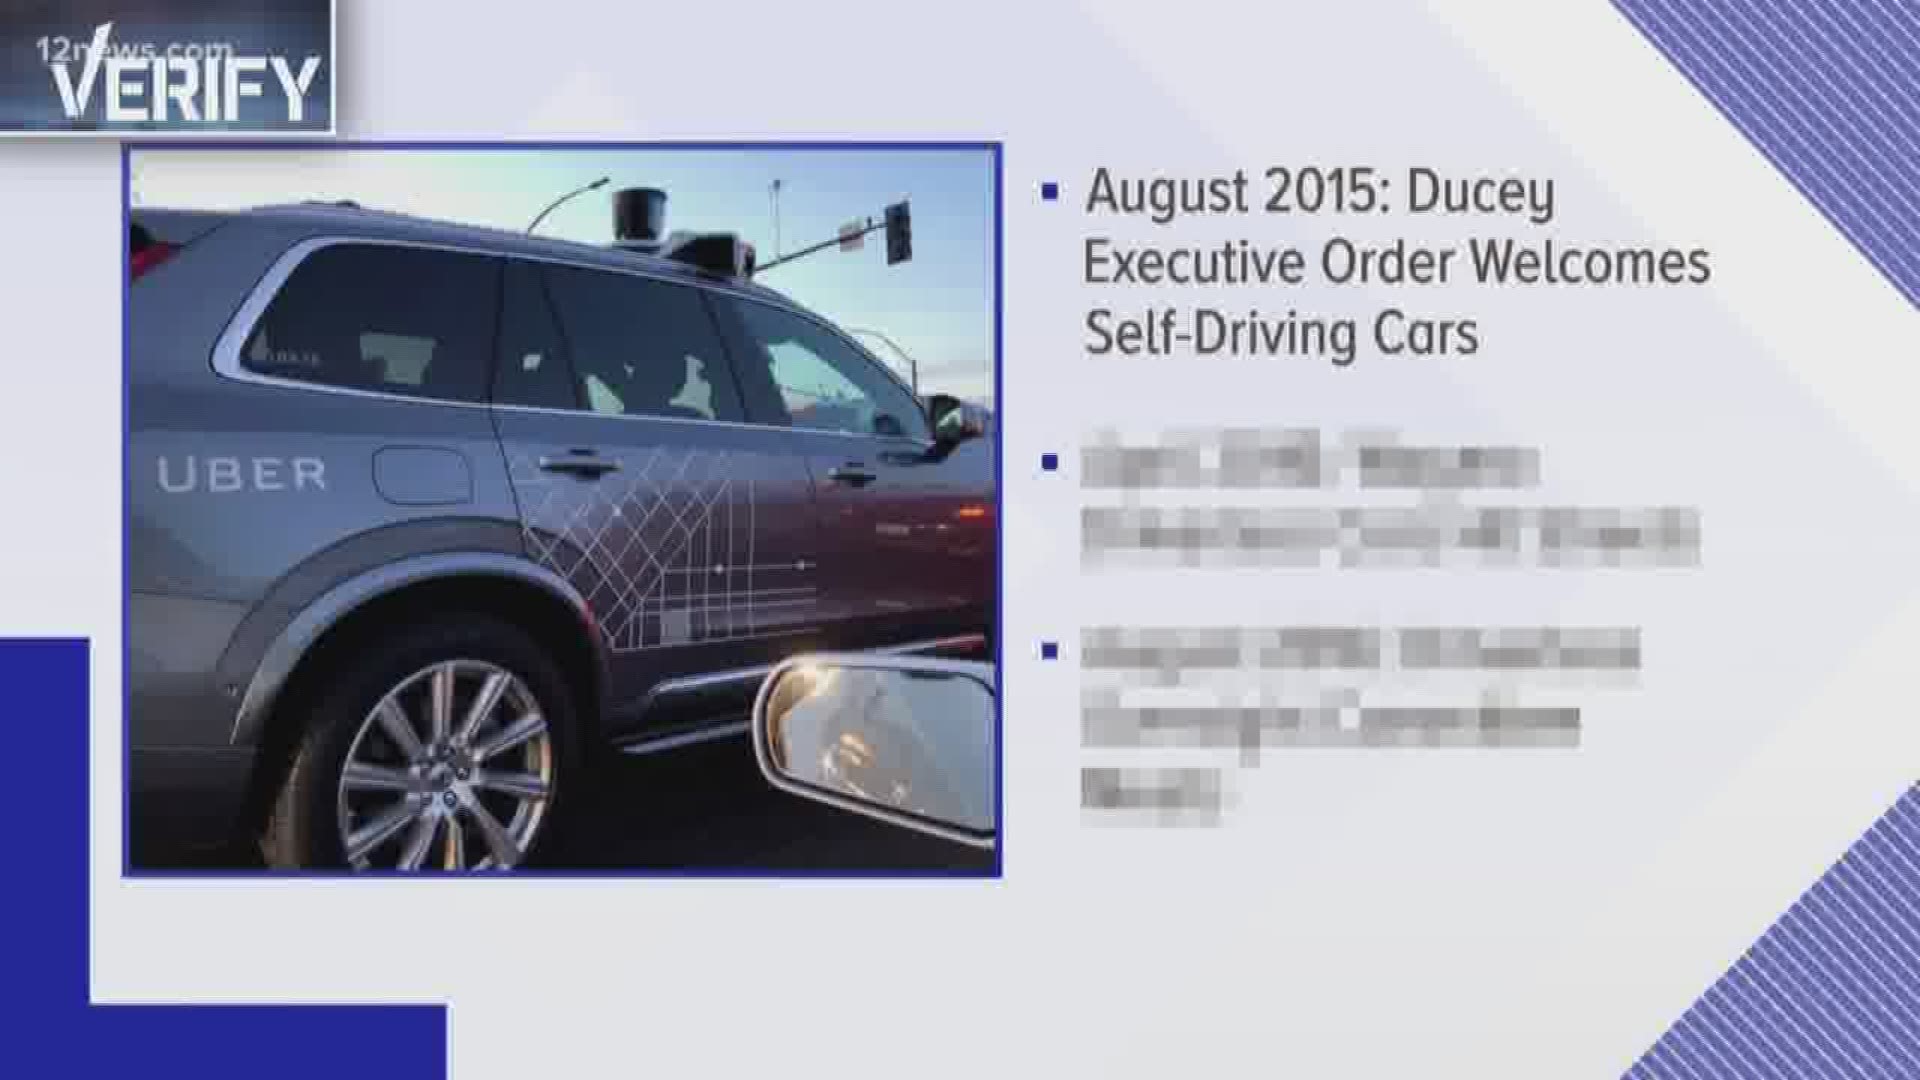 A new report claims Uber did secret testing in Arizona before the state told the public.